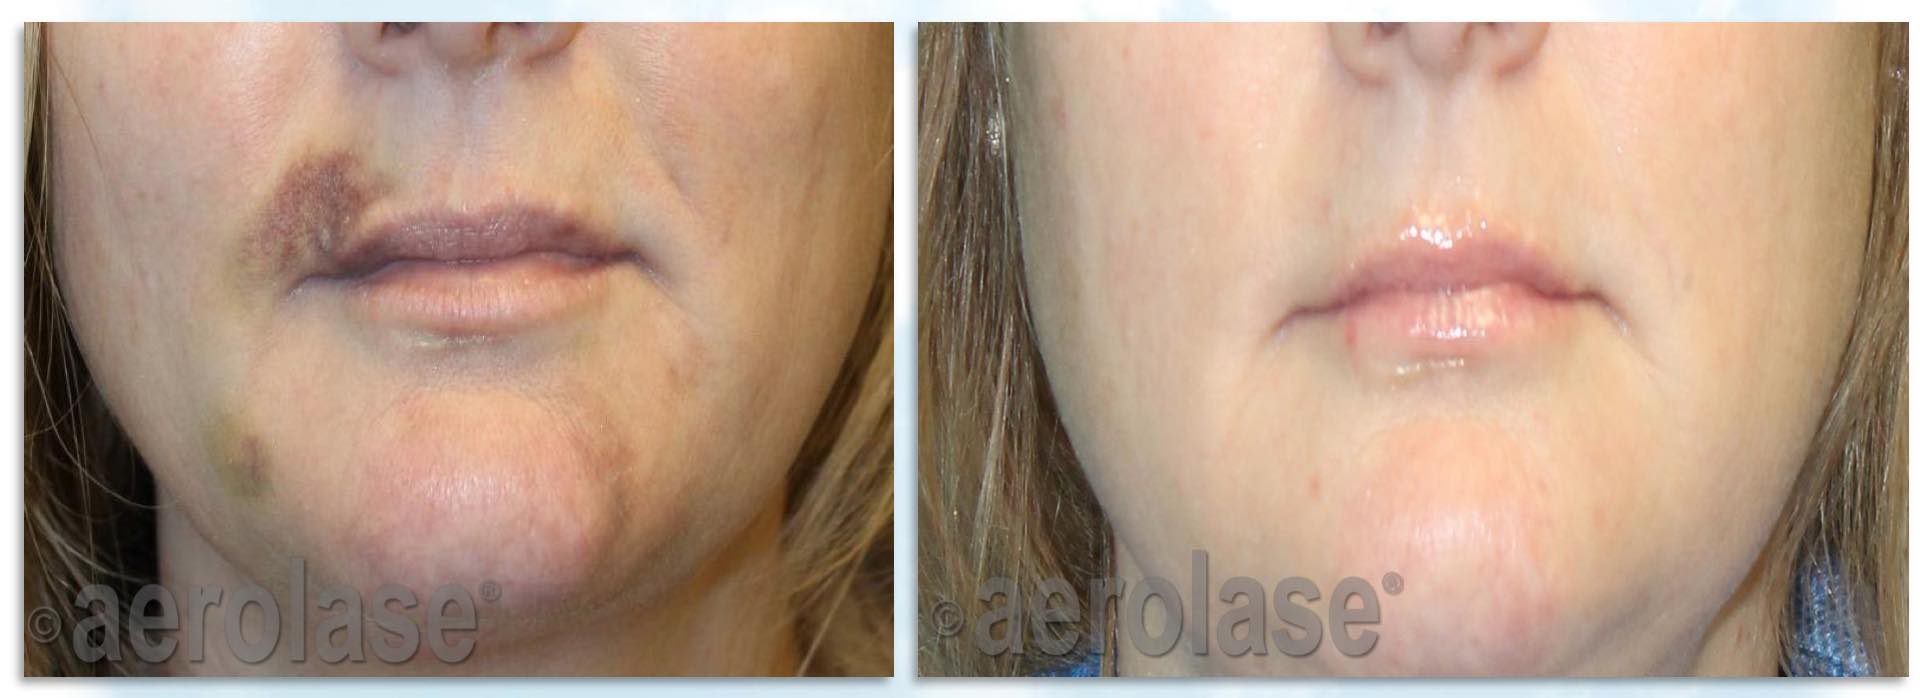 Treatment of facial bruising with Aerolase Neo laser Dr BCK Patel MD, FRCS Plastic Surgeon Salt Lake City and St George UtahPicturePicture